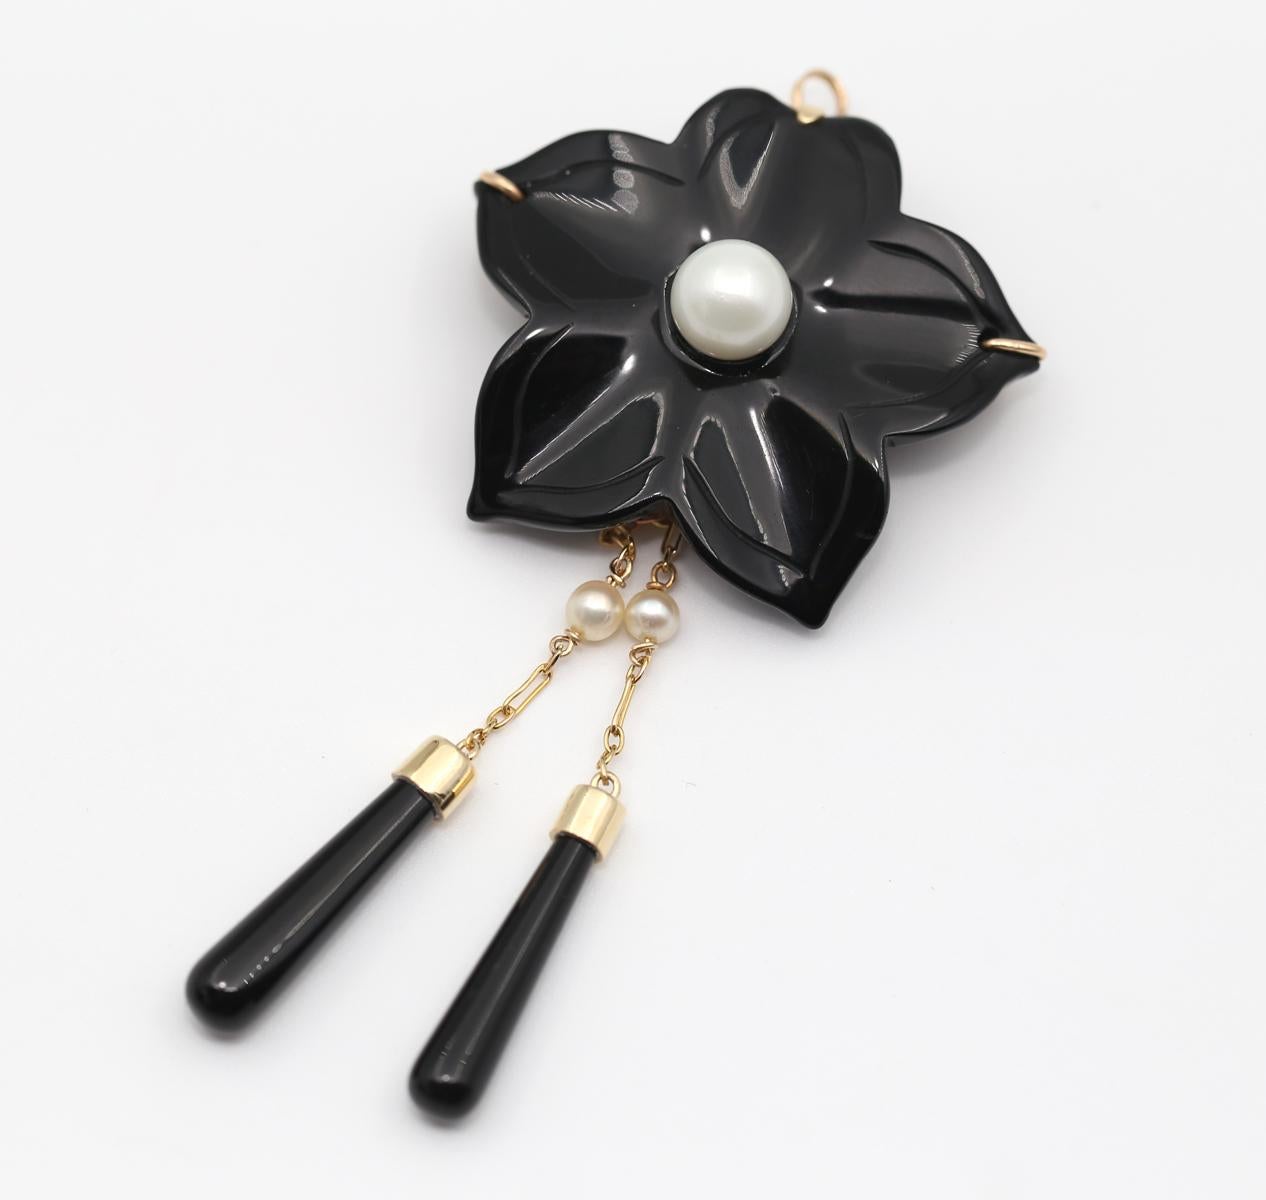 Onyx Flower Brooch Pendant Pearls 14K Gold, 1930

Onyx flower with two detachable Pearl and Onyx pendants. 14K Gold. Created around 1930es.

Really fine and stylish item. It can be worn as a brooch or as a pendant. There is a special loop on the